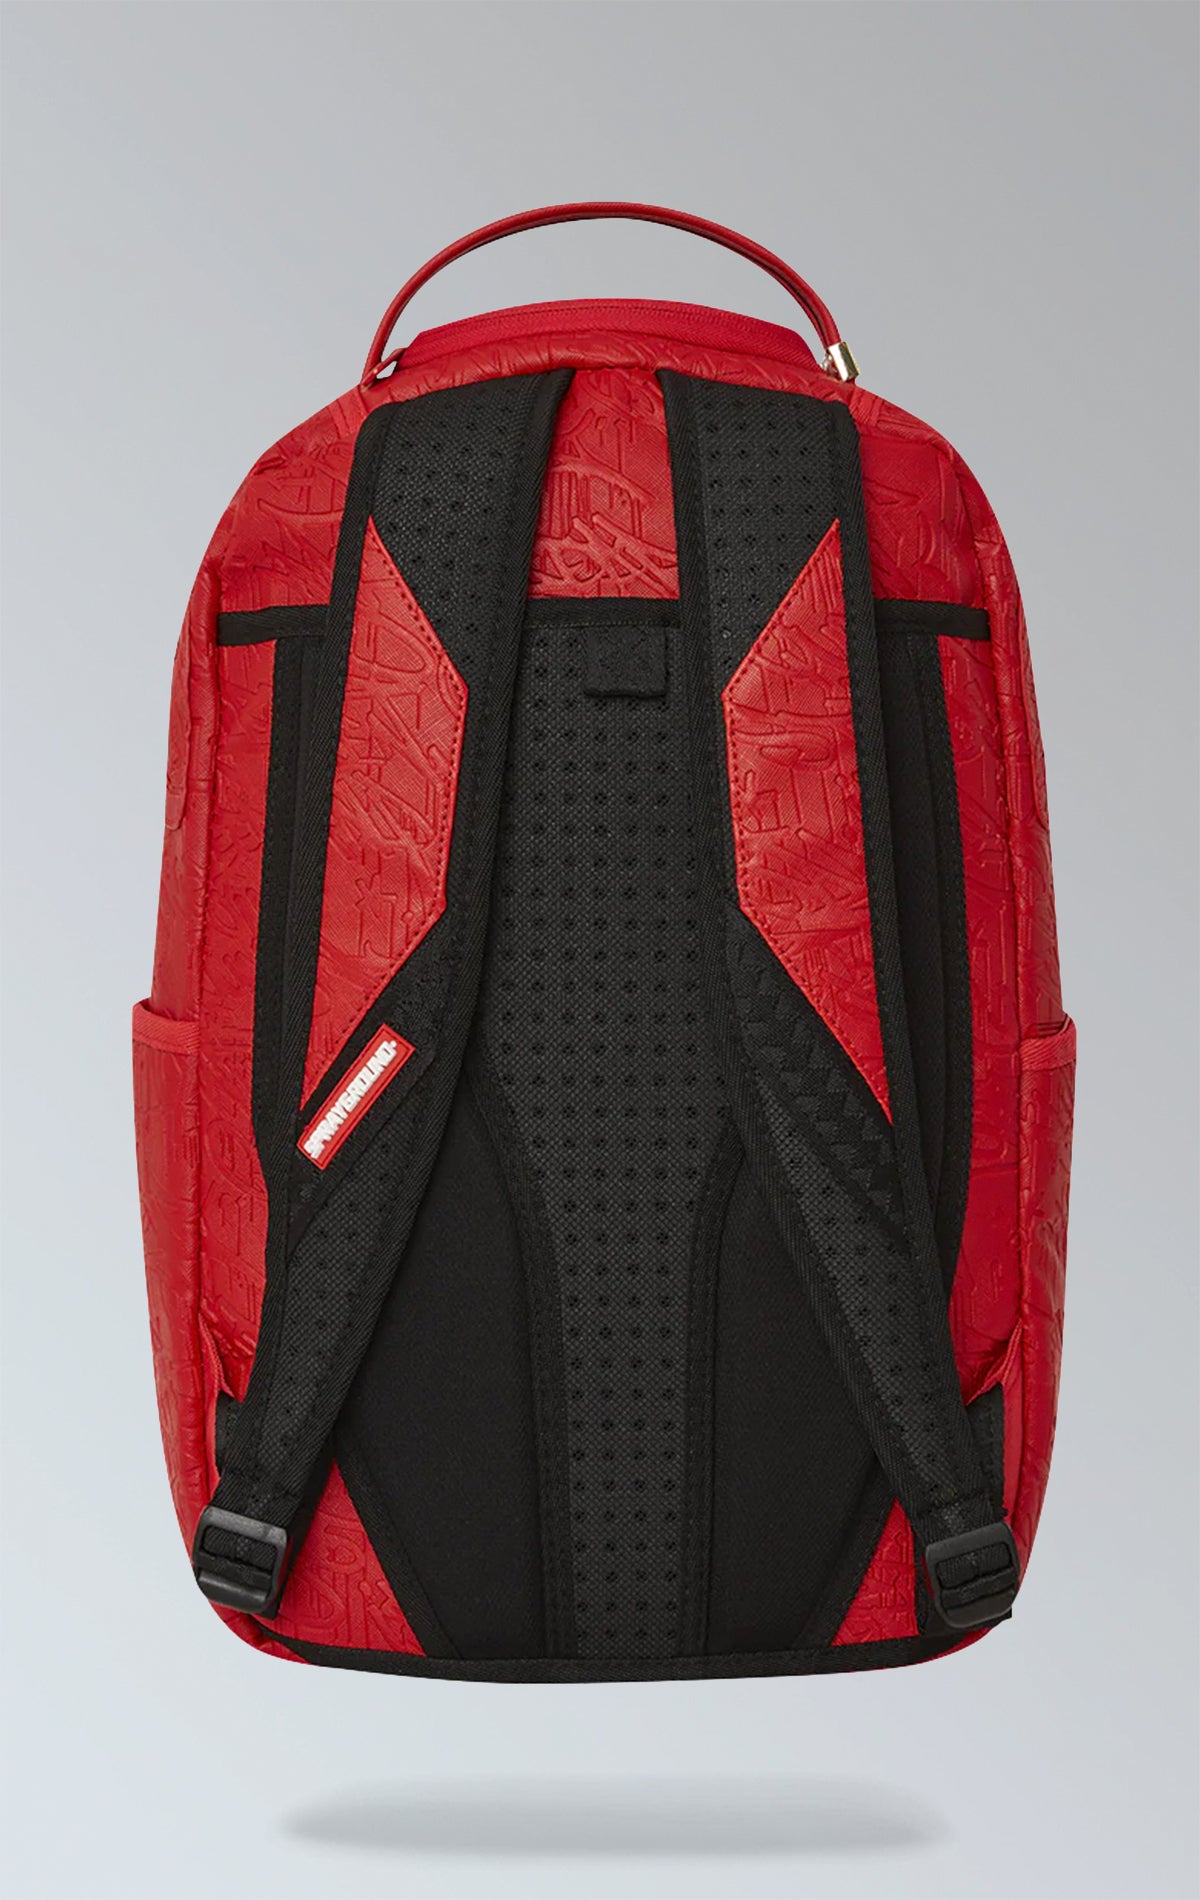 Red Sprayground backpack with an eye-catching scribble design. Features multiple compartments including a separate velour laptop compartment, side pockets, and a hidden zippered pocket. Equipped with ergonomic mesh back padding, adjustable straps, and a sliding back sleeve for attaching to carry-on luggage. Made from durable vegan leather.